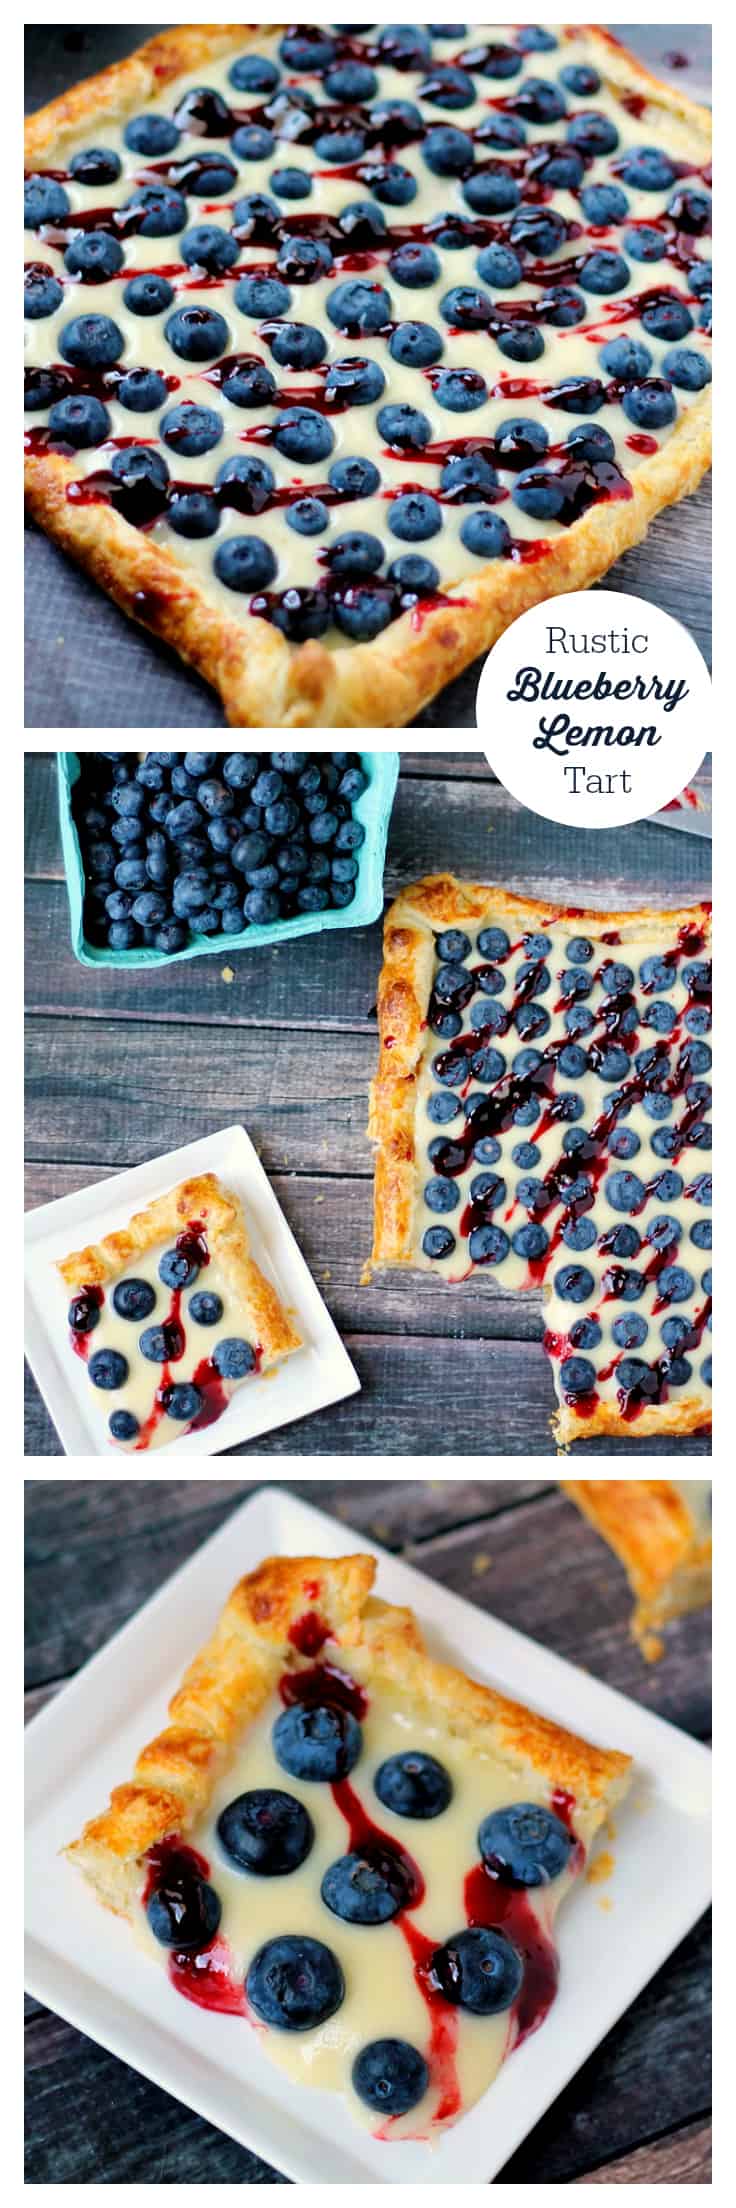 Rustic Blueberry Lemon Tart - A fruity tart that's beautiful and delicious! The light, fluffy puff pastry is the perfect canvas for luscious lemon curd and fresh blueberries.